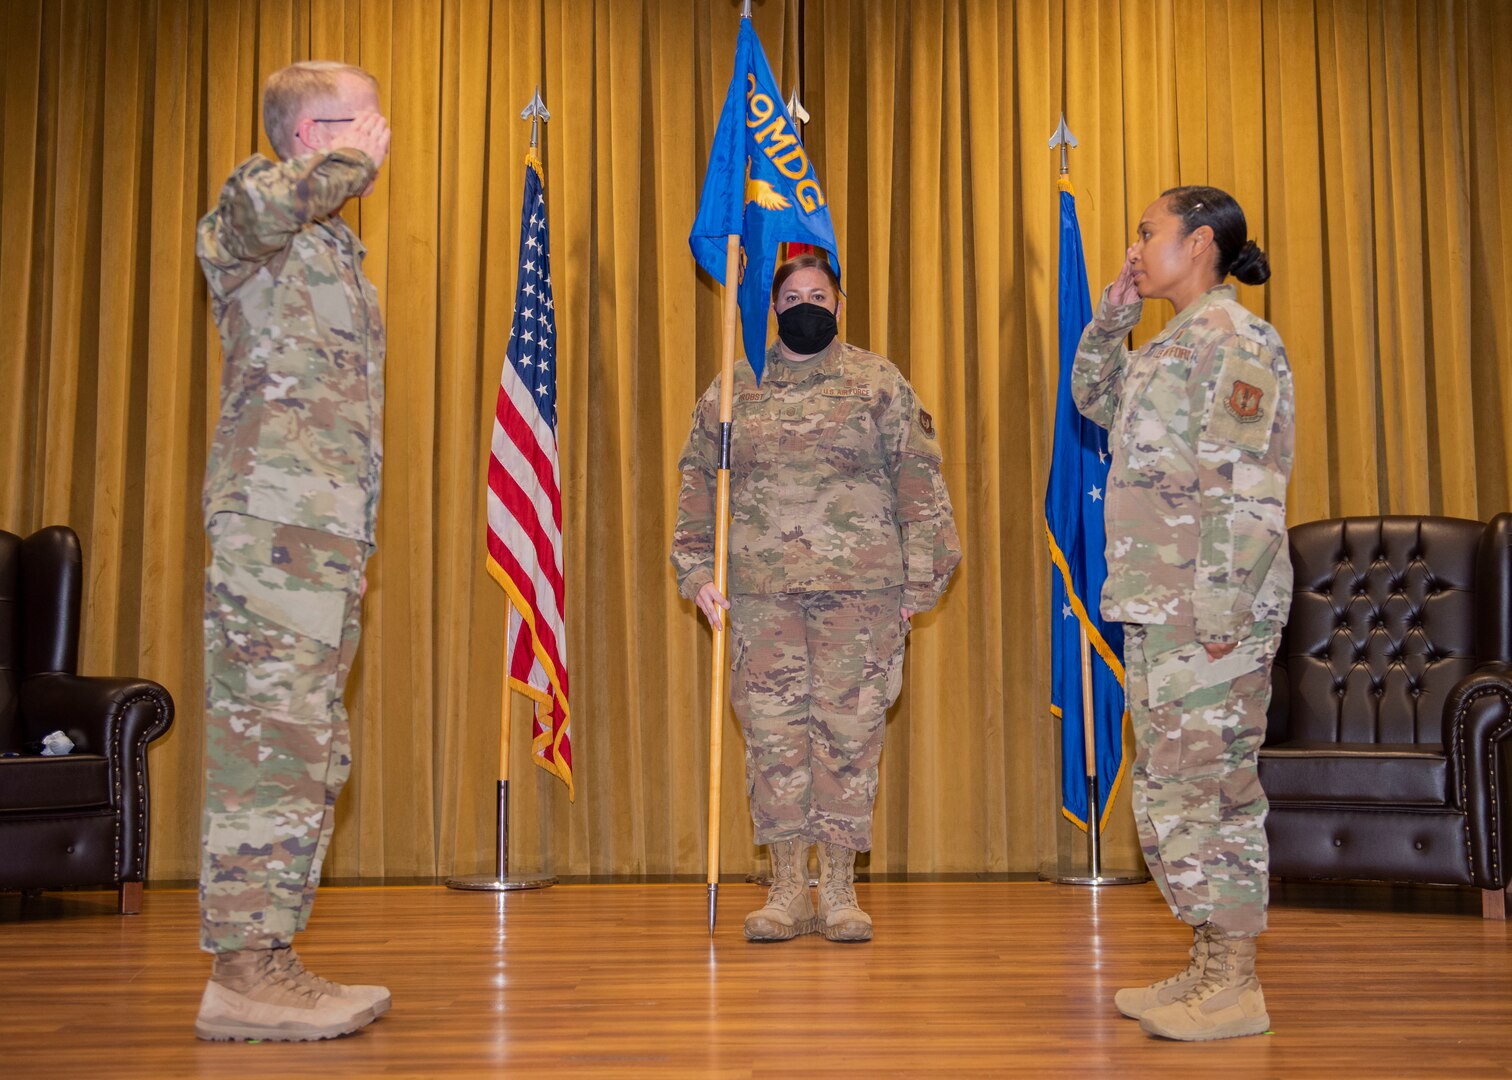 The 39th MDG commander and the 39th HCOS commander salute each other.